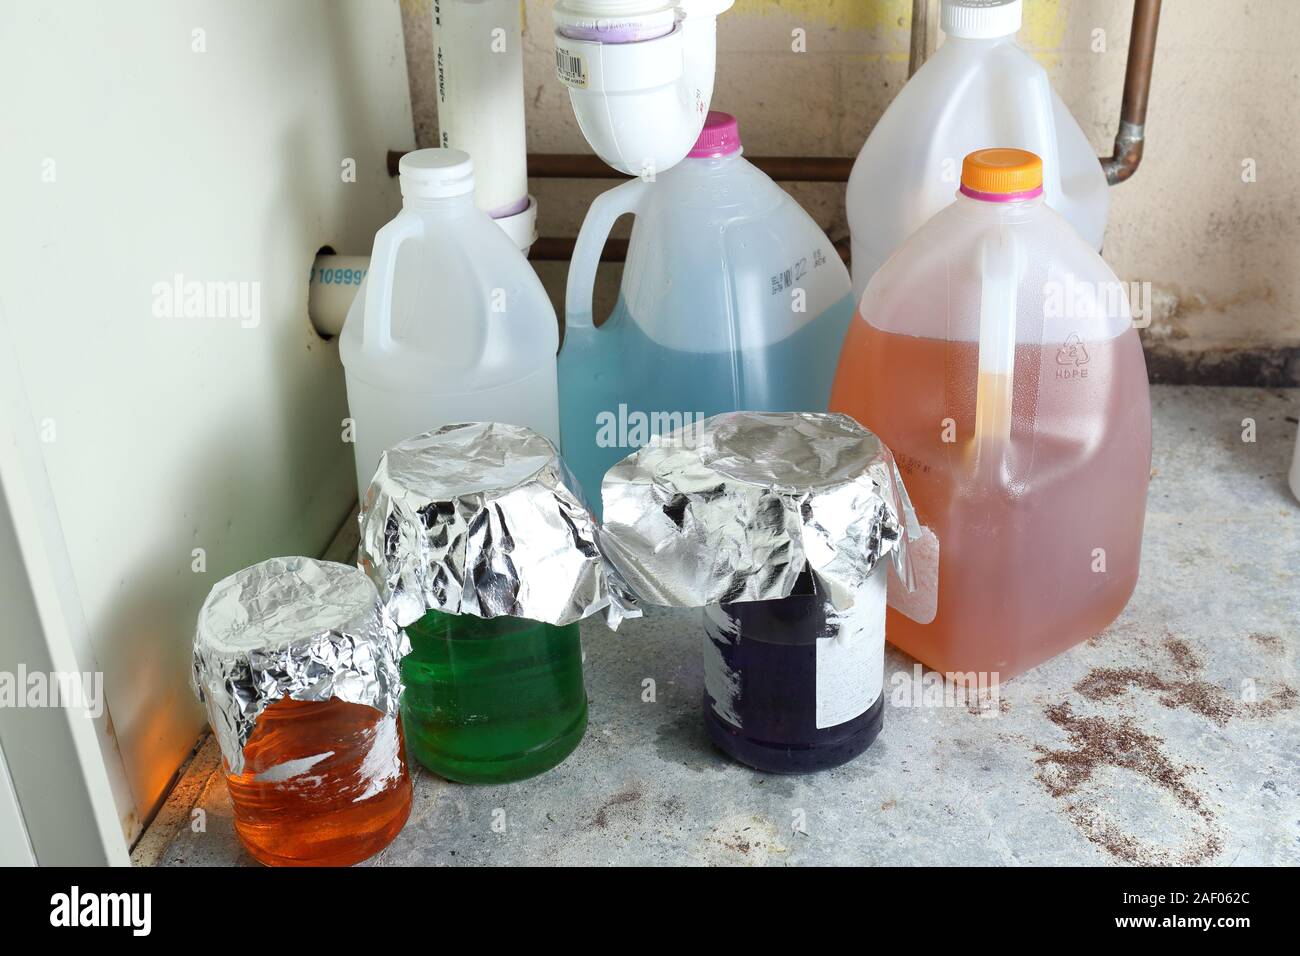 Variety in mysterious chemicals stored improperly and unlabeled in jugs and jars under a sink Stock Photo